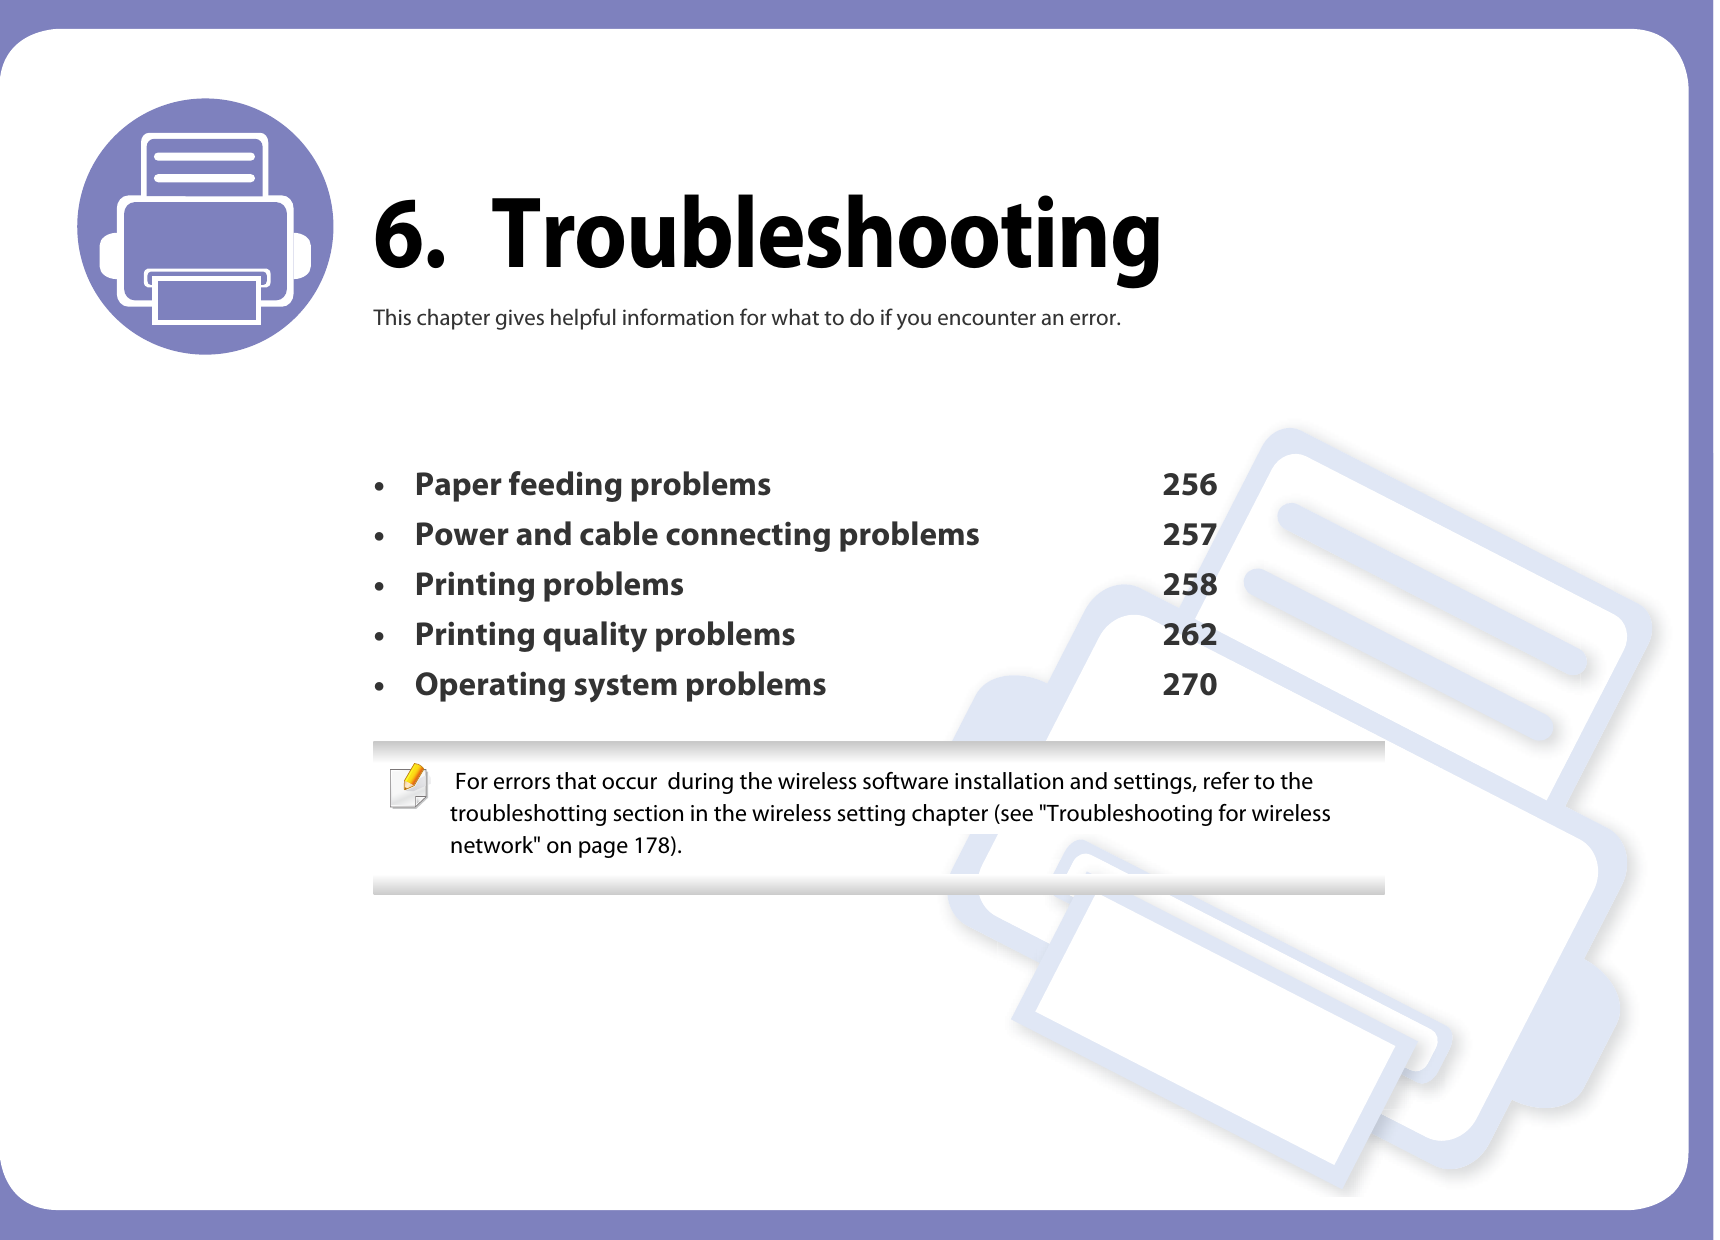 6. TroubleshootingThis chapter gives helpful information for what to do if you encounter an error.• Paper feeding problems 256• Power and cable connecting problems 257• Printing problems 258• Printing quality problems 262• Operating system problems 270  For errors that occur  during the wireless software installation and settings, refer to the troubleshotting section in the wireless setting chapter (see &quot;Troubleshooting for wireless network&quot; on page 178). 